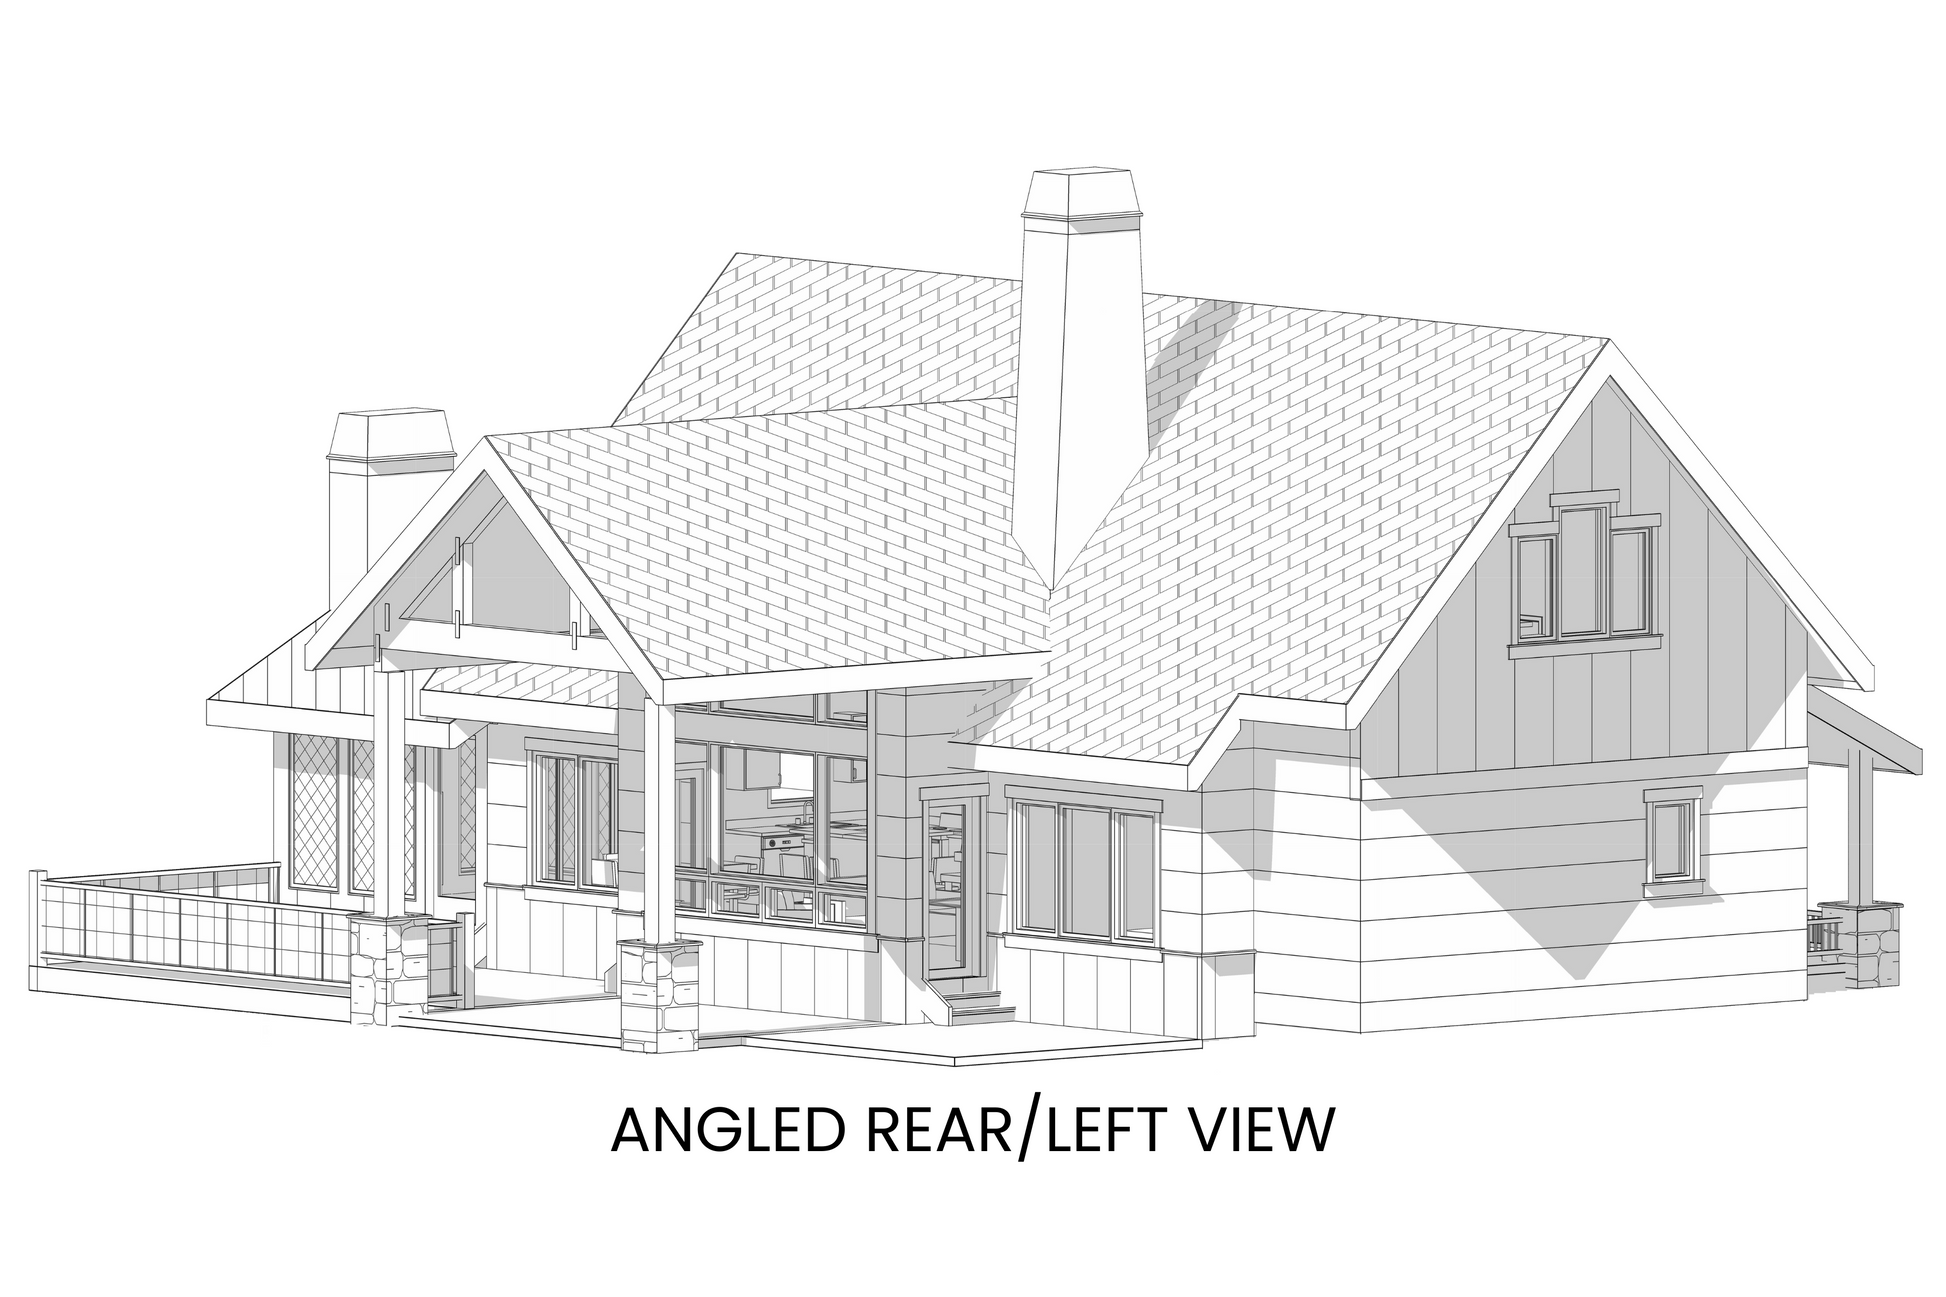 Cabin-Plan-with-Front-Porch-for-Sites-with-a-Rear-View-Angled-Rear-View-Rocky-Mountain-Plan-Company-Lake-Agnes